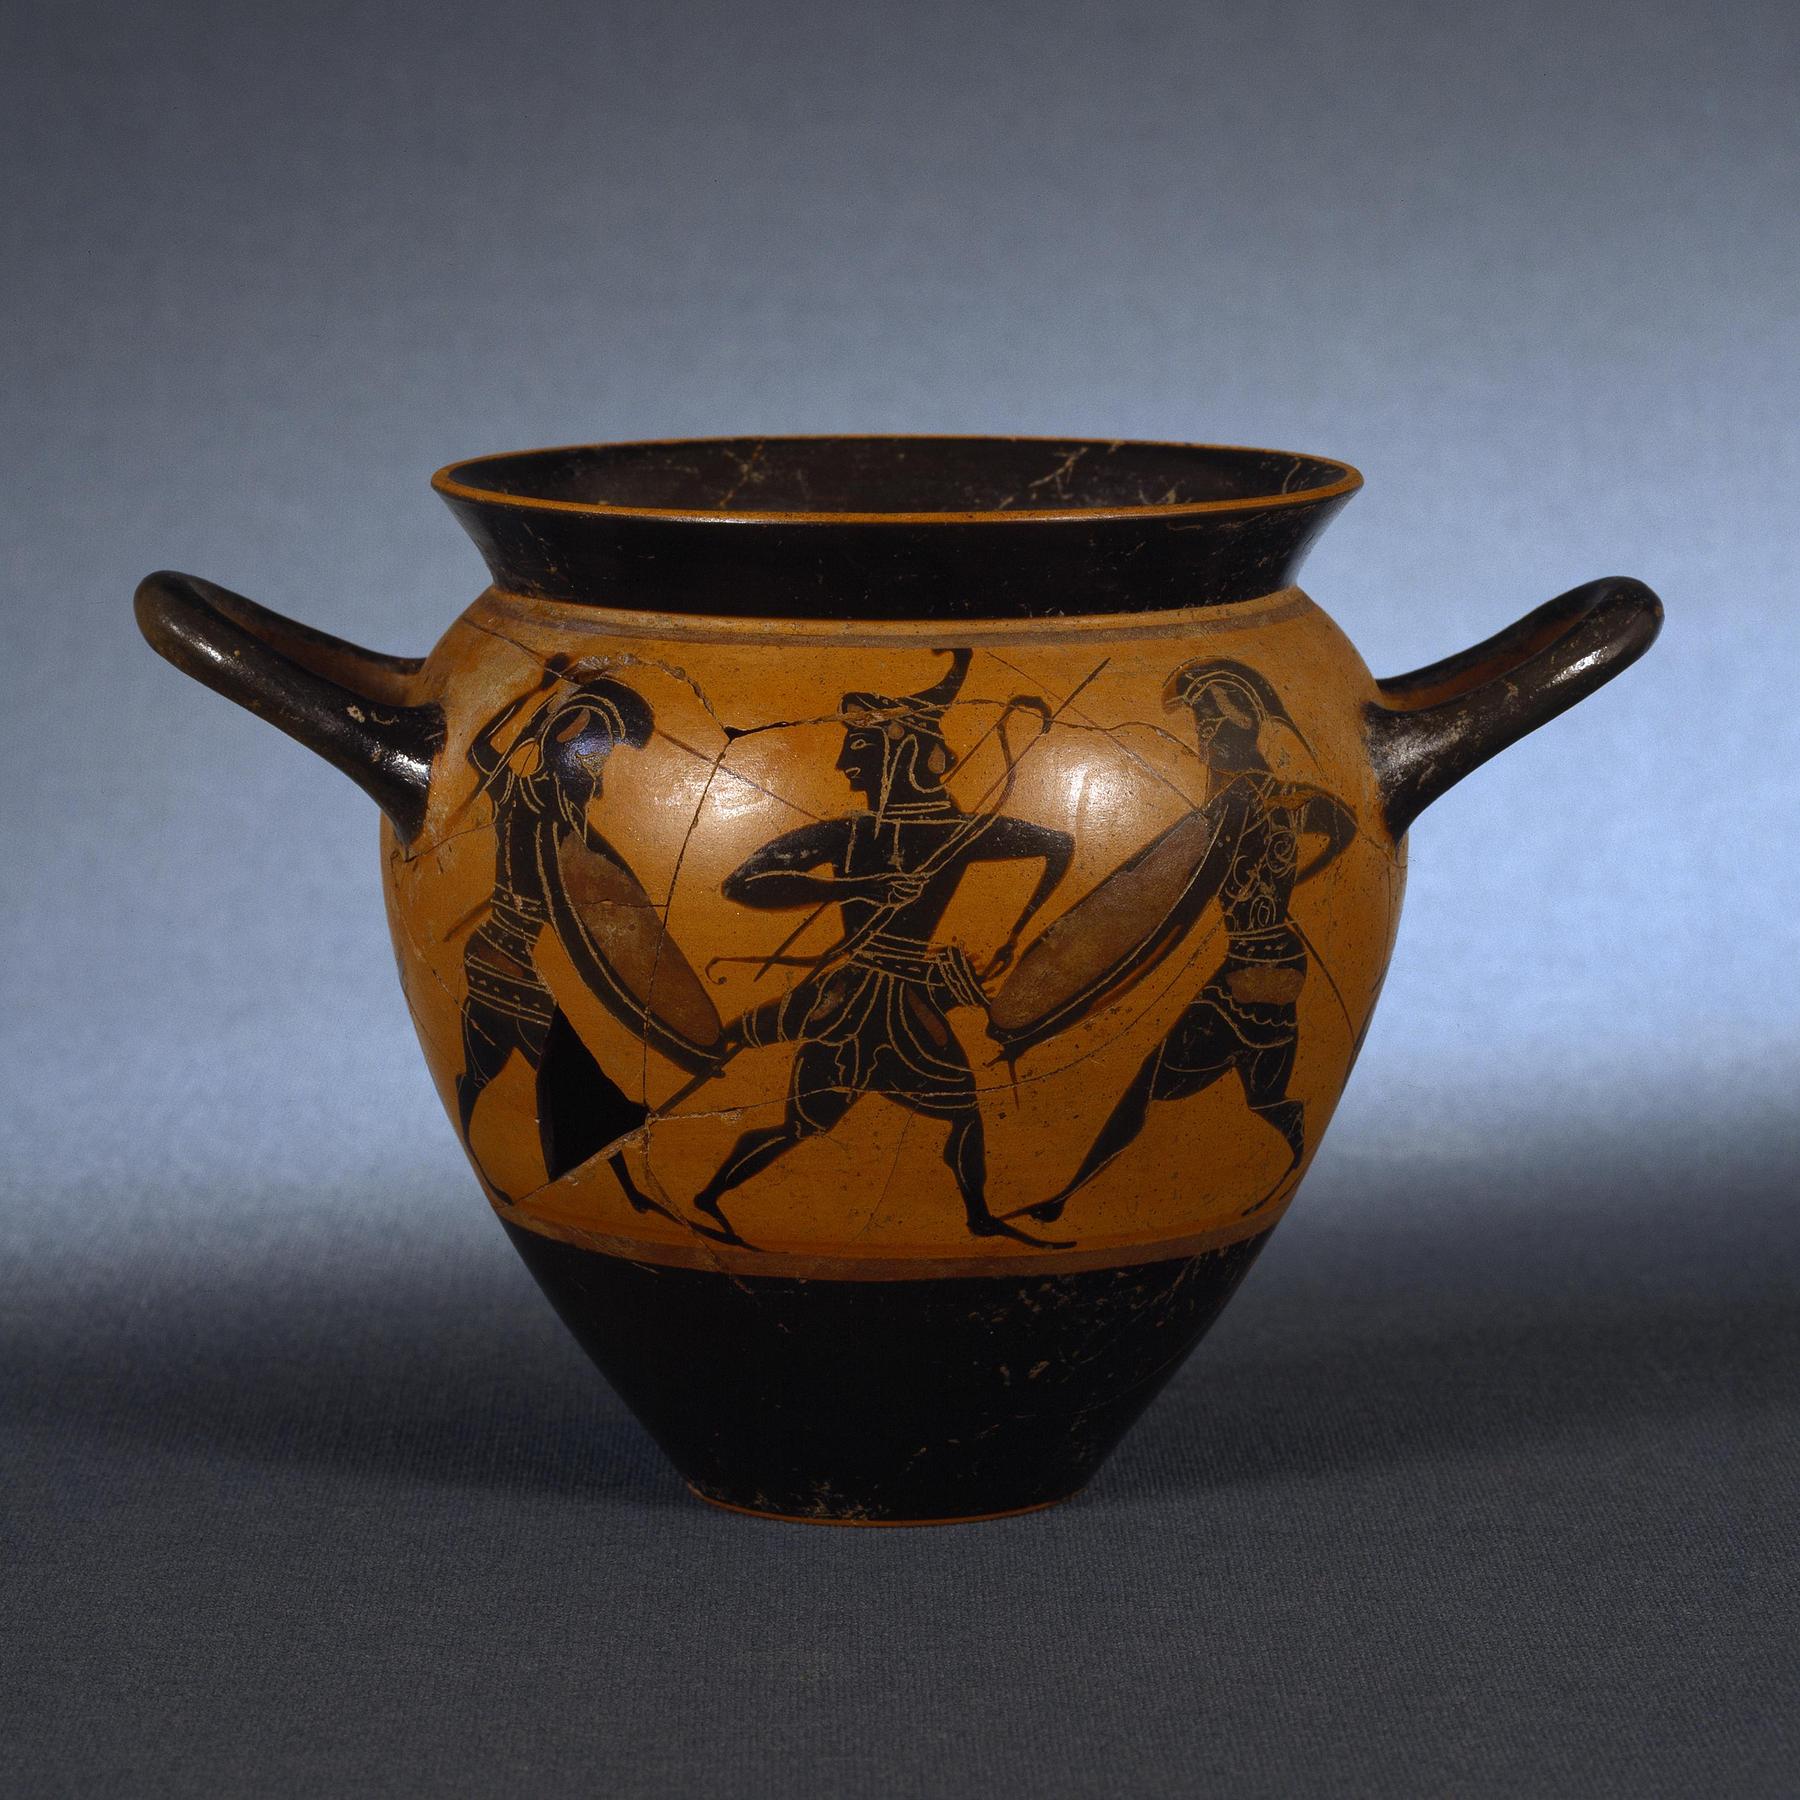 Drinking cup with battle scene (A) and a warrior between two women (B), H550